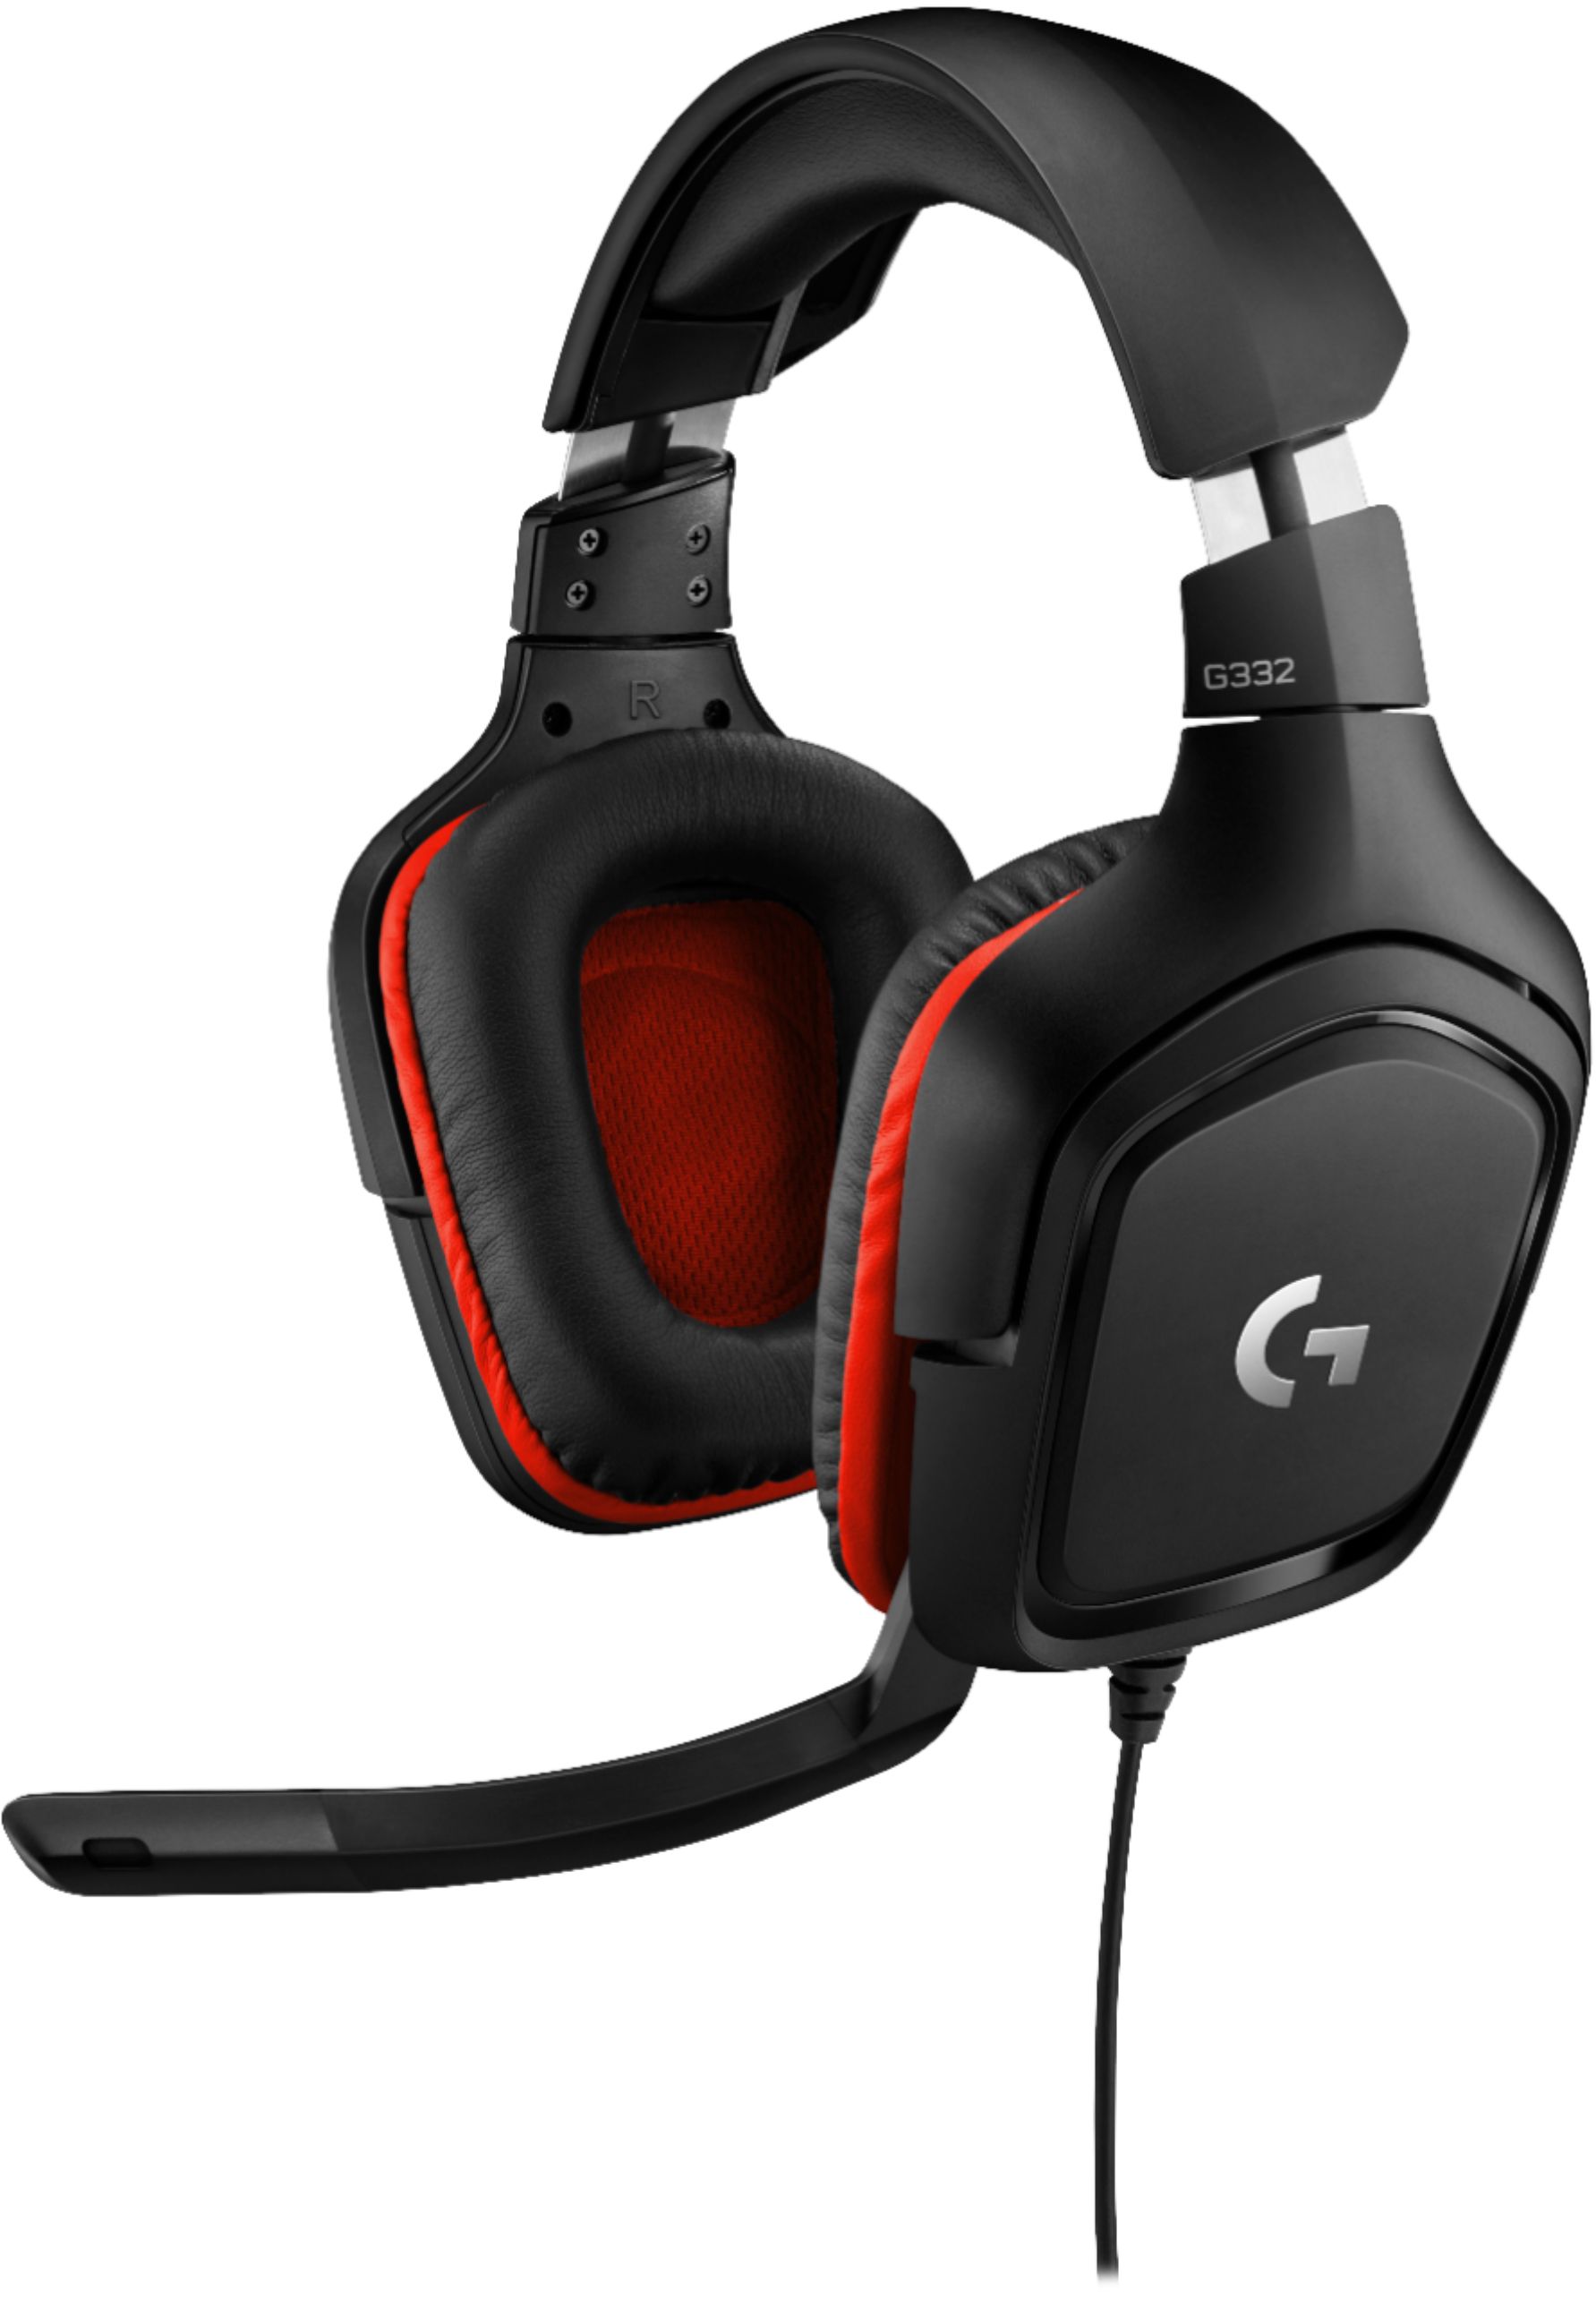 Angle View: Logitech - G733 LIGHTSPEED Wireless Gaming Headset for PS4, PC - Black